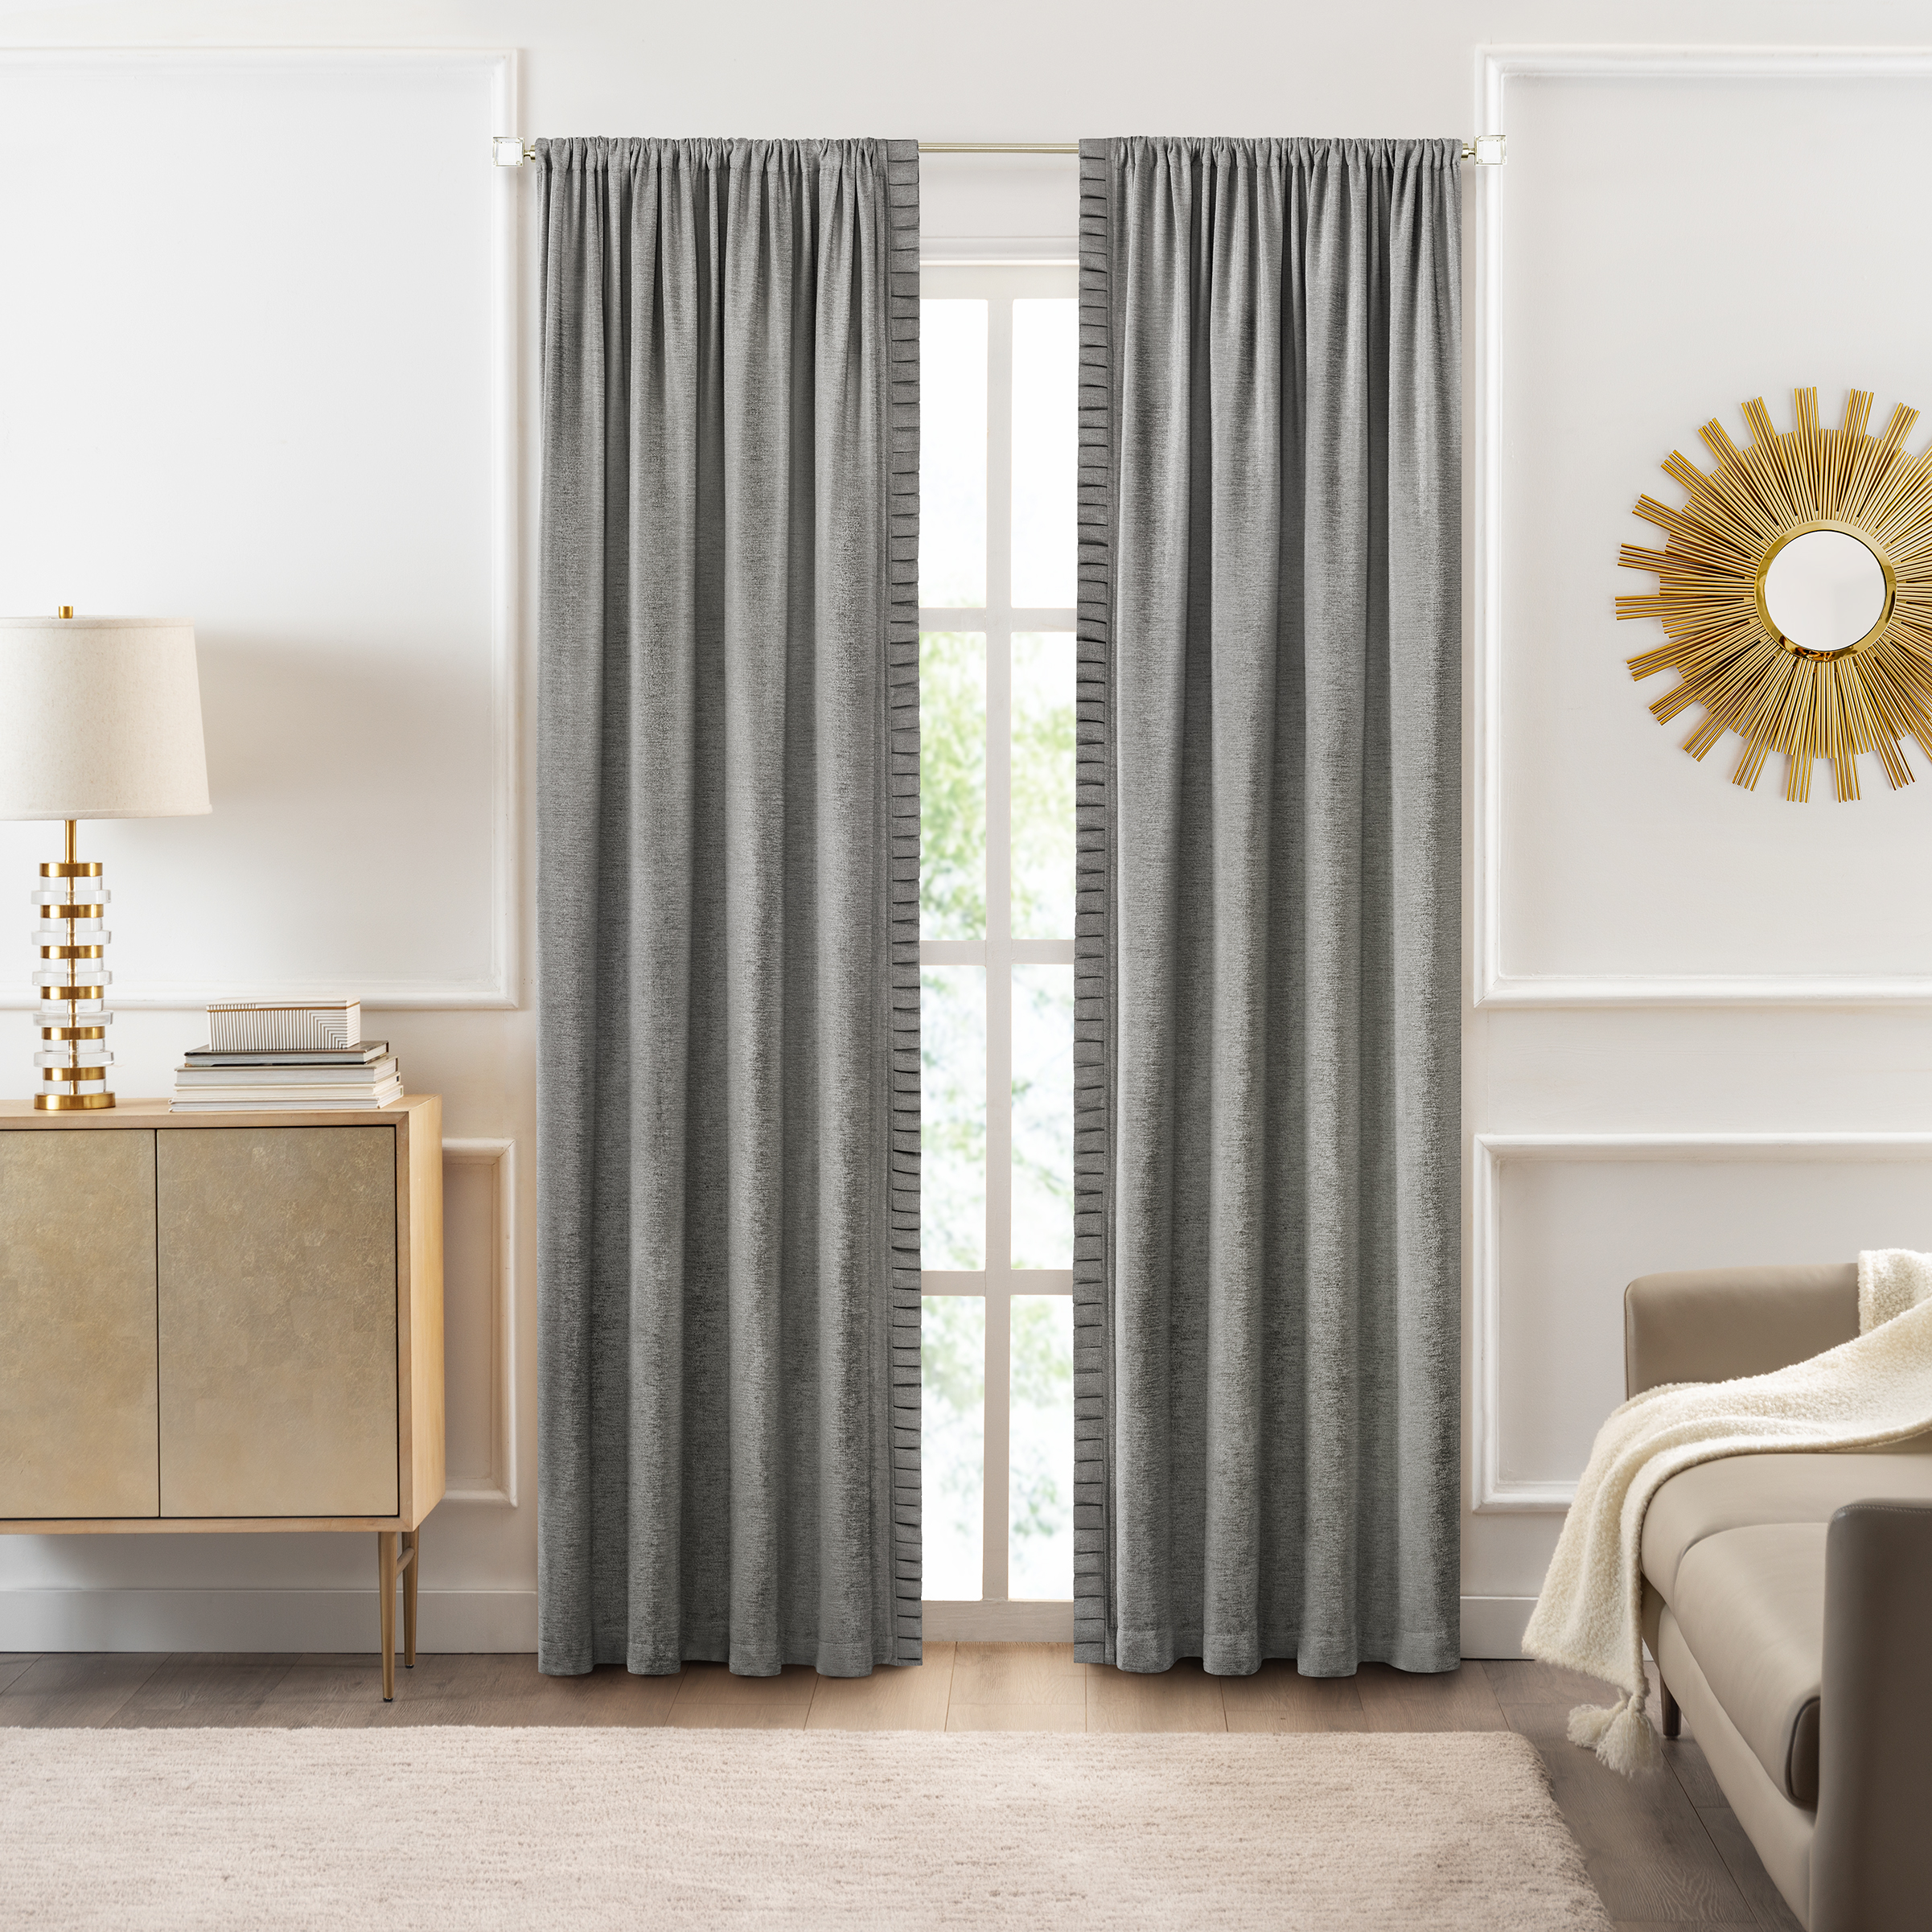 Achim Bordeaux Indoor Polyester Light Filtering Solid Curtain Panel, Silver, 52-in W x 63-in L - image 4 of 7